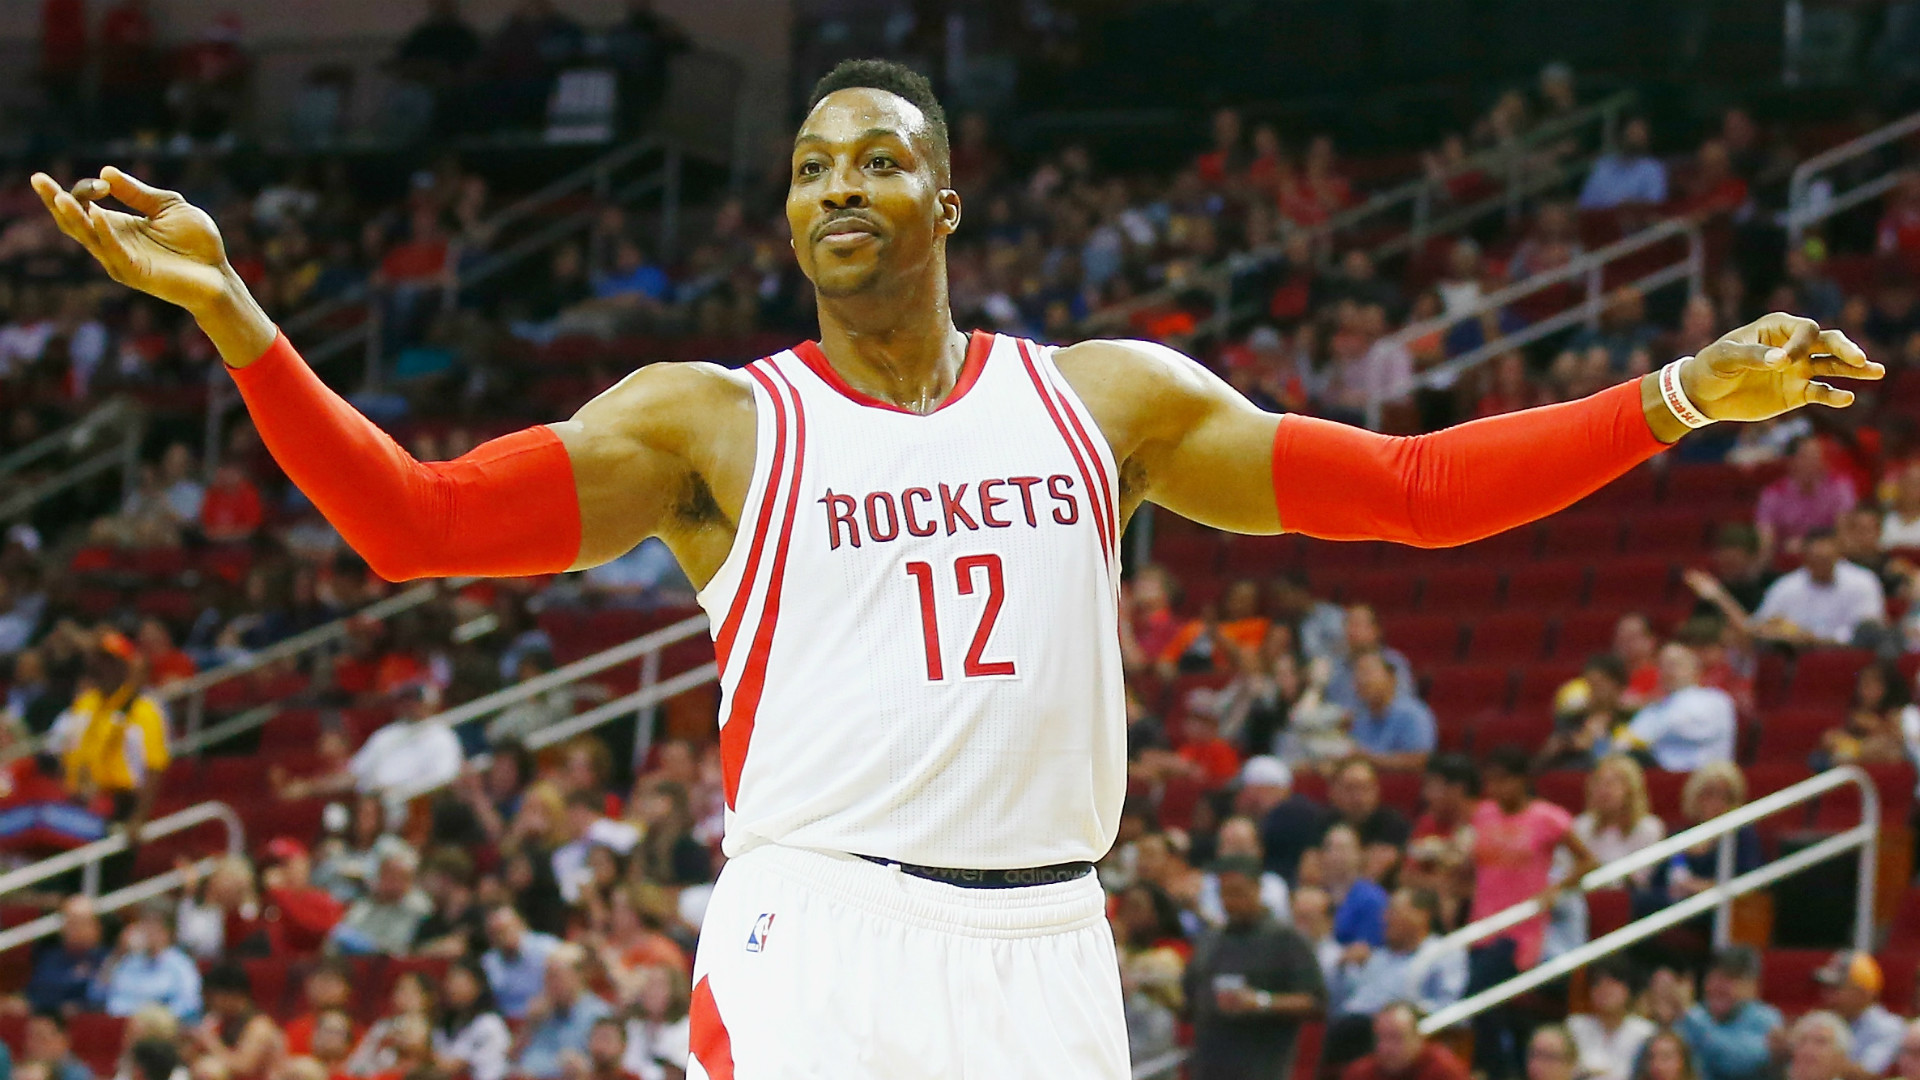 1920x1080 Rockets can let Dwight Howard walk and make improvements they actually need  | NBA | Sporting News